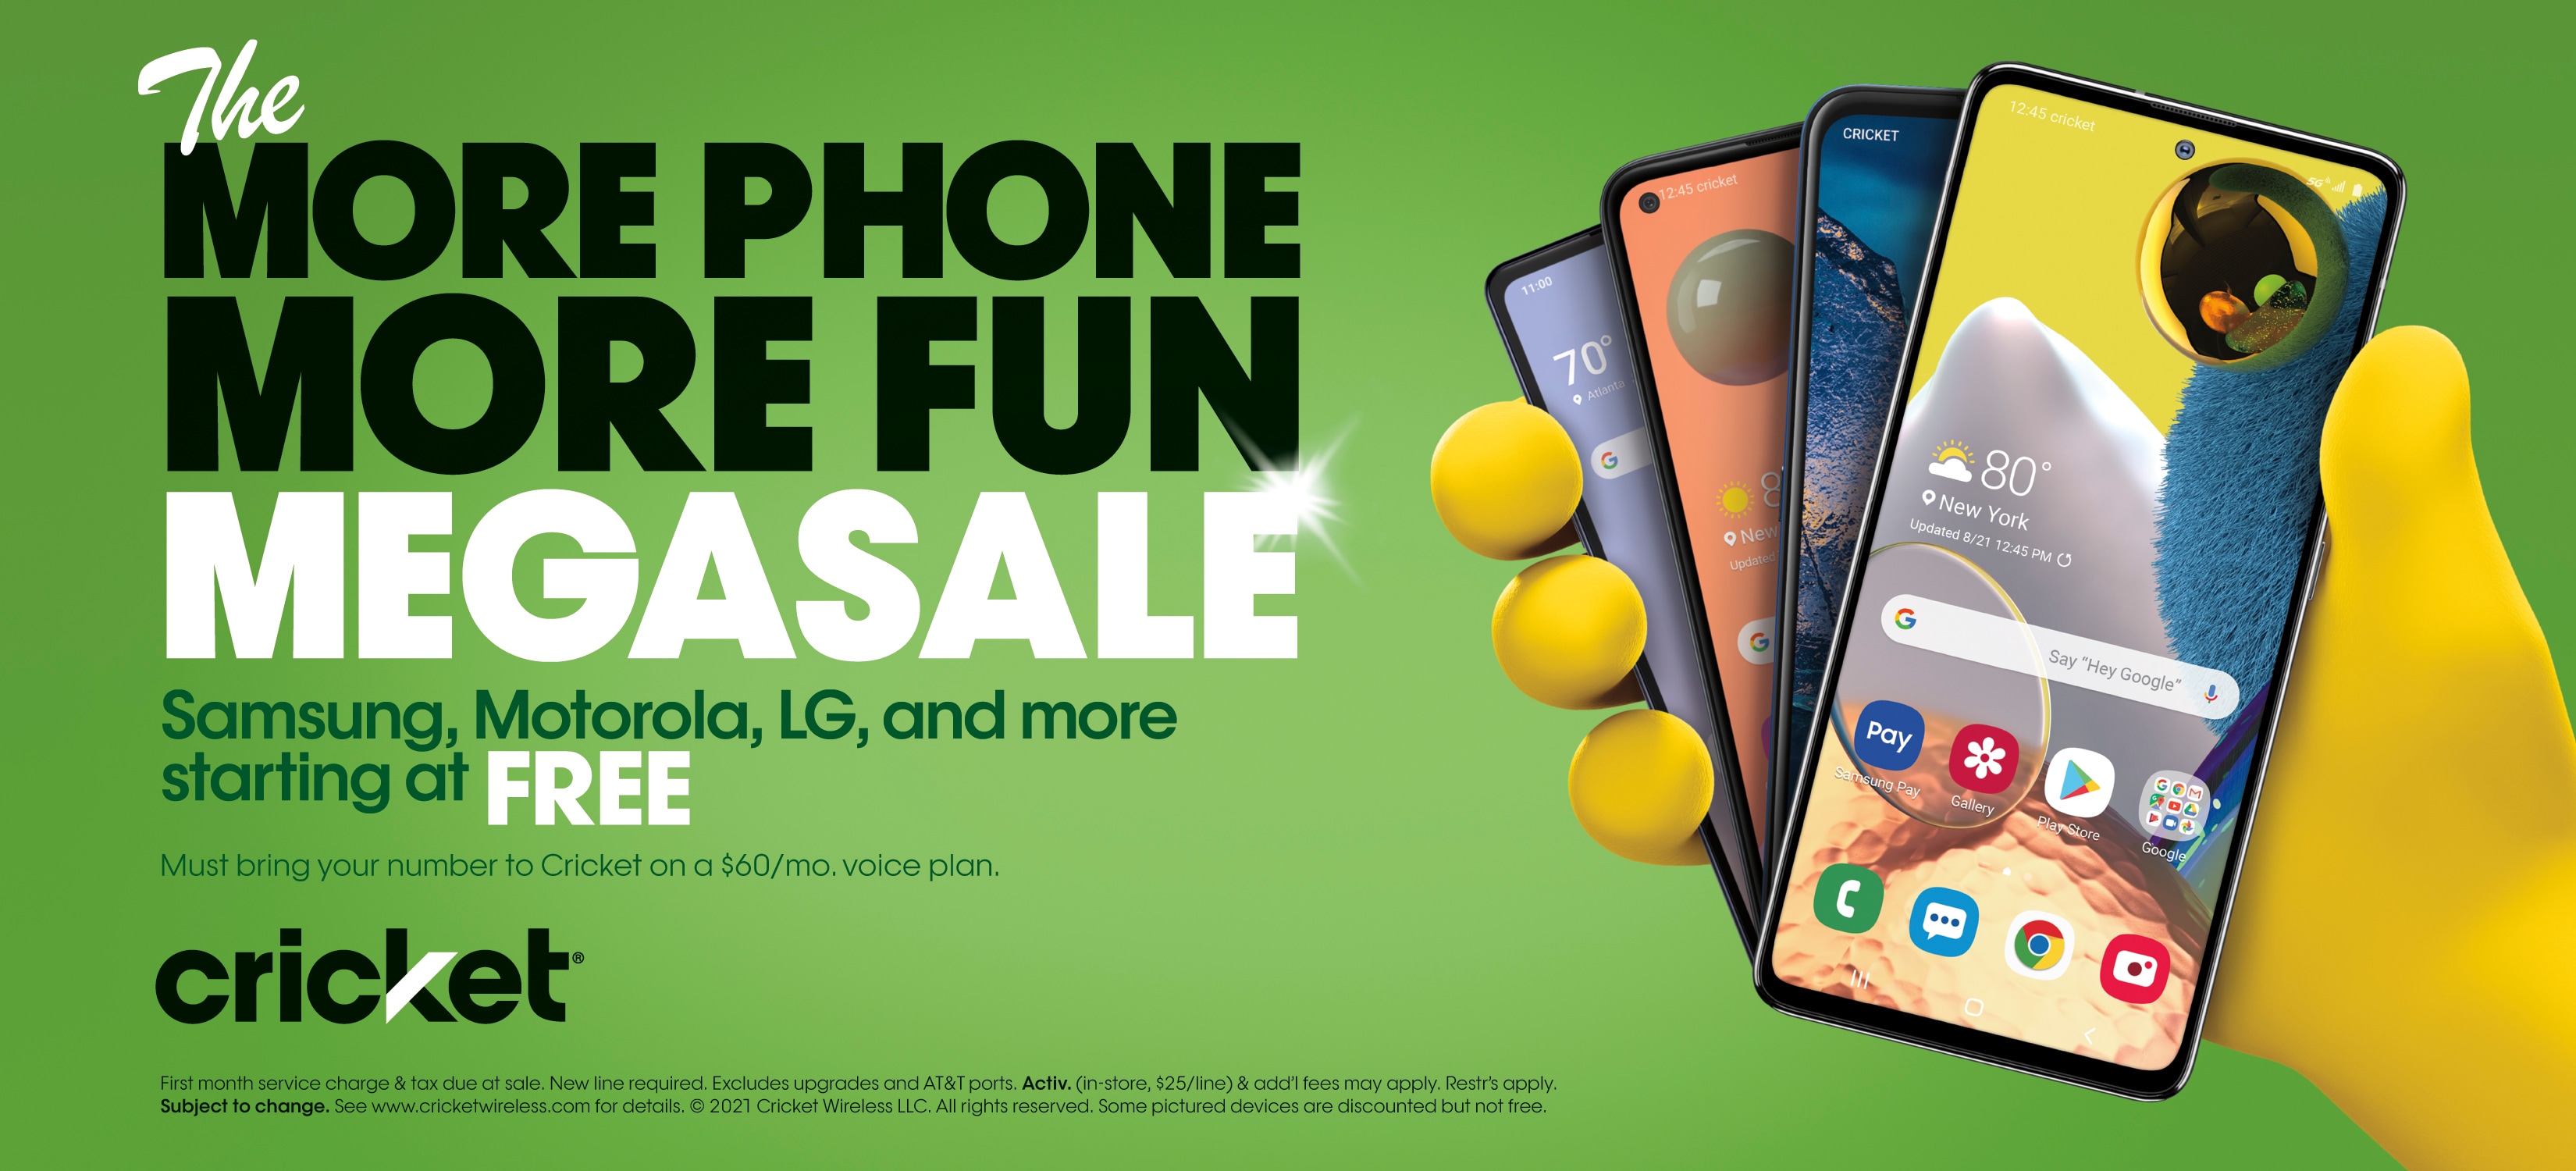 The MORE PHONE MORE FUN MEGASALE. Samsung, Motorola, LG, and more starting at FREE. Must bring your number to Cricket on a $60/mo. voice plan. First month service change & tax due at sale. New line required. Excludes upgrades and AT&T ports. Activ. (in-store $25/line) & add'l fees may apply. Restr's apply. Subject to change. See www.cricketwireless.com for details. Some pictured devices are discounted but not free.